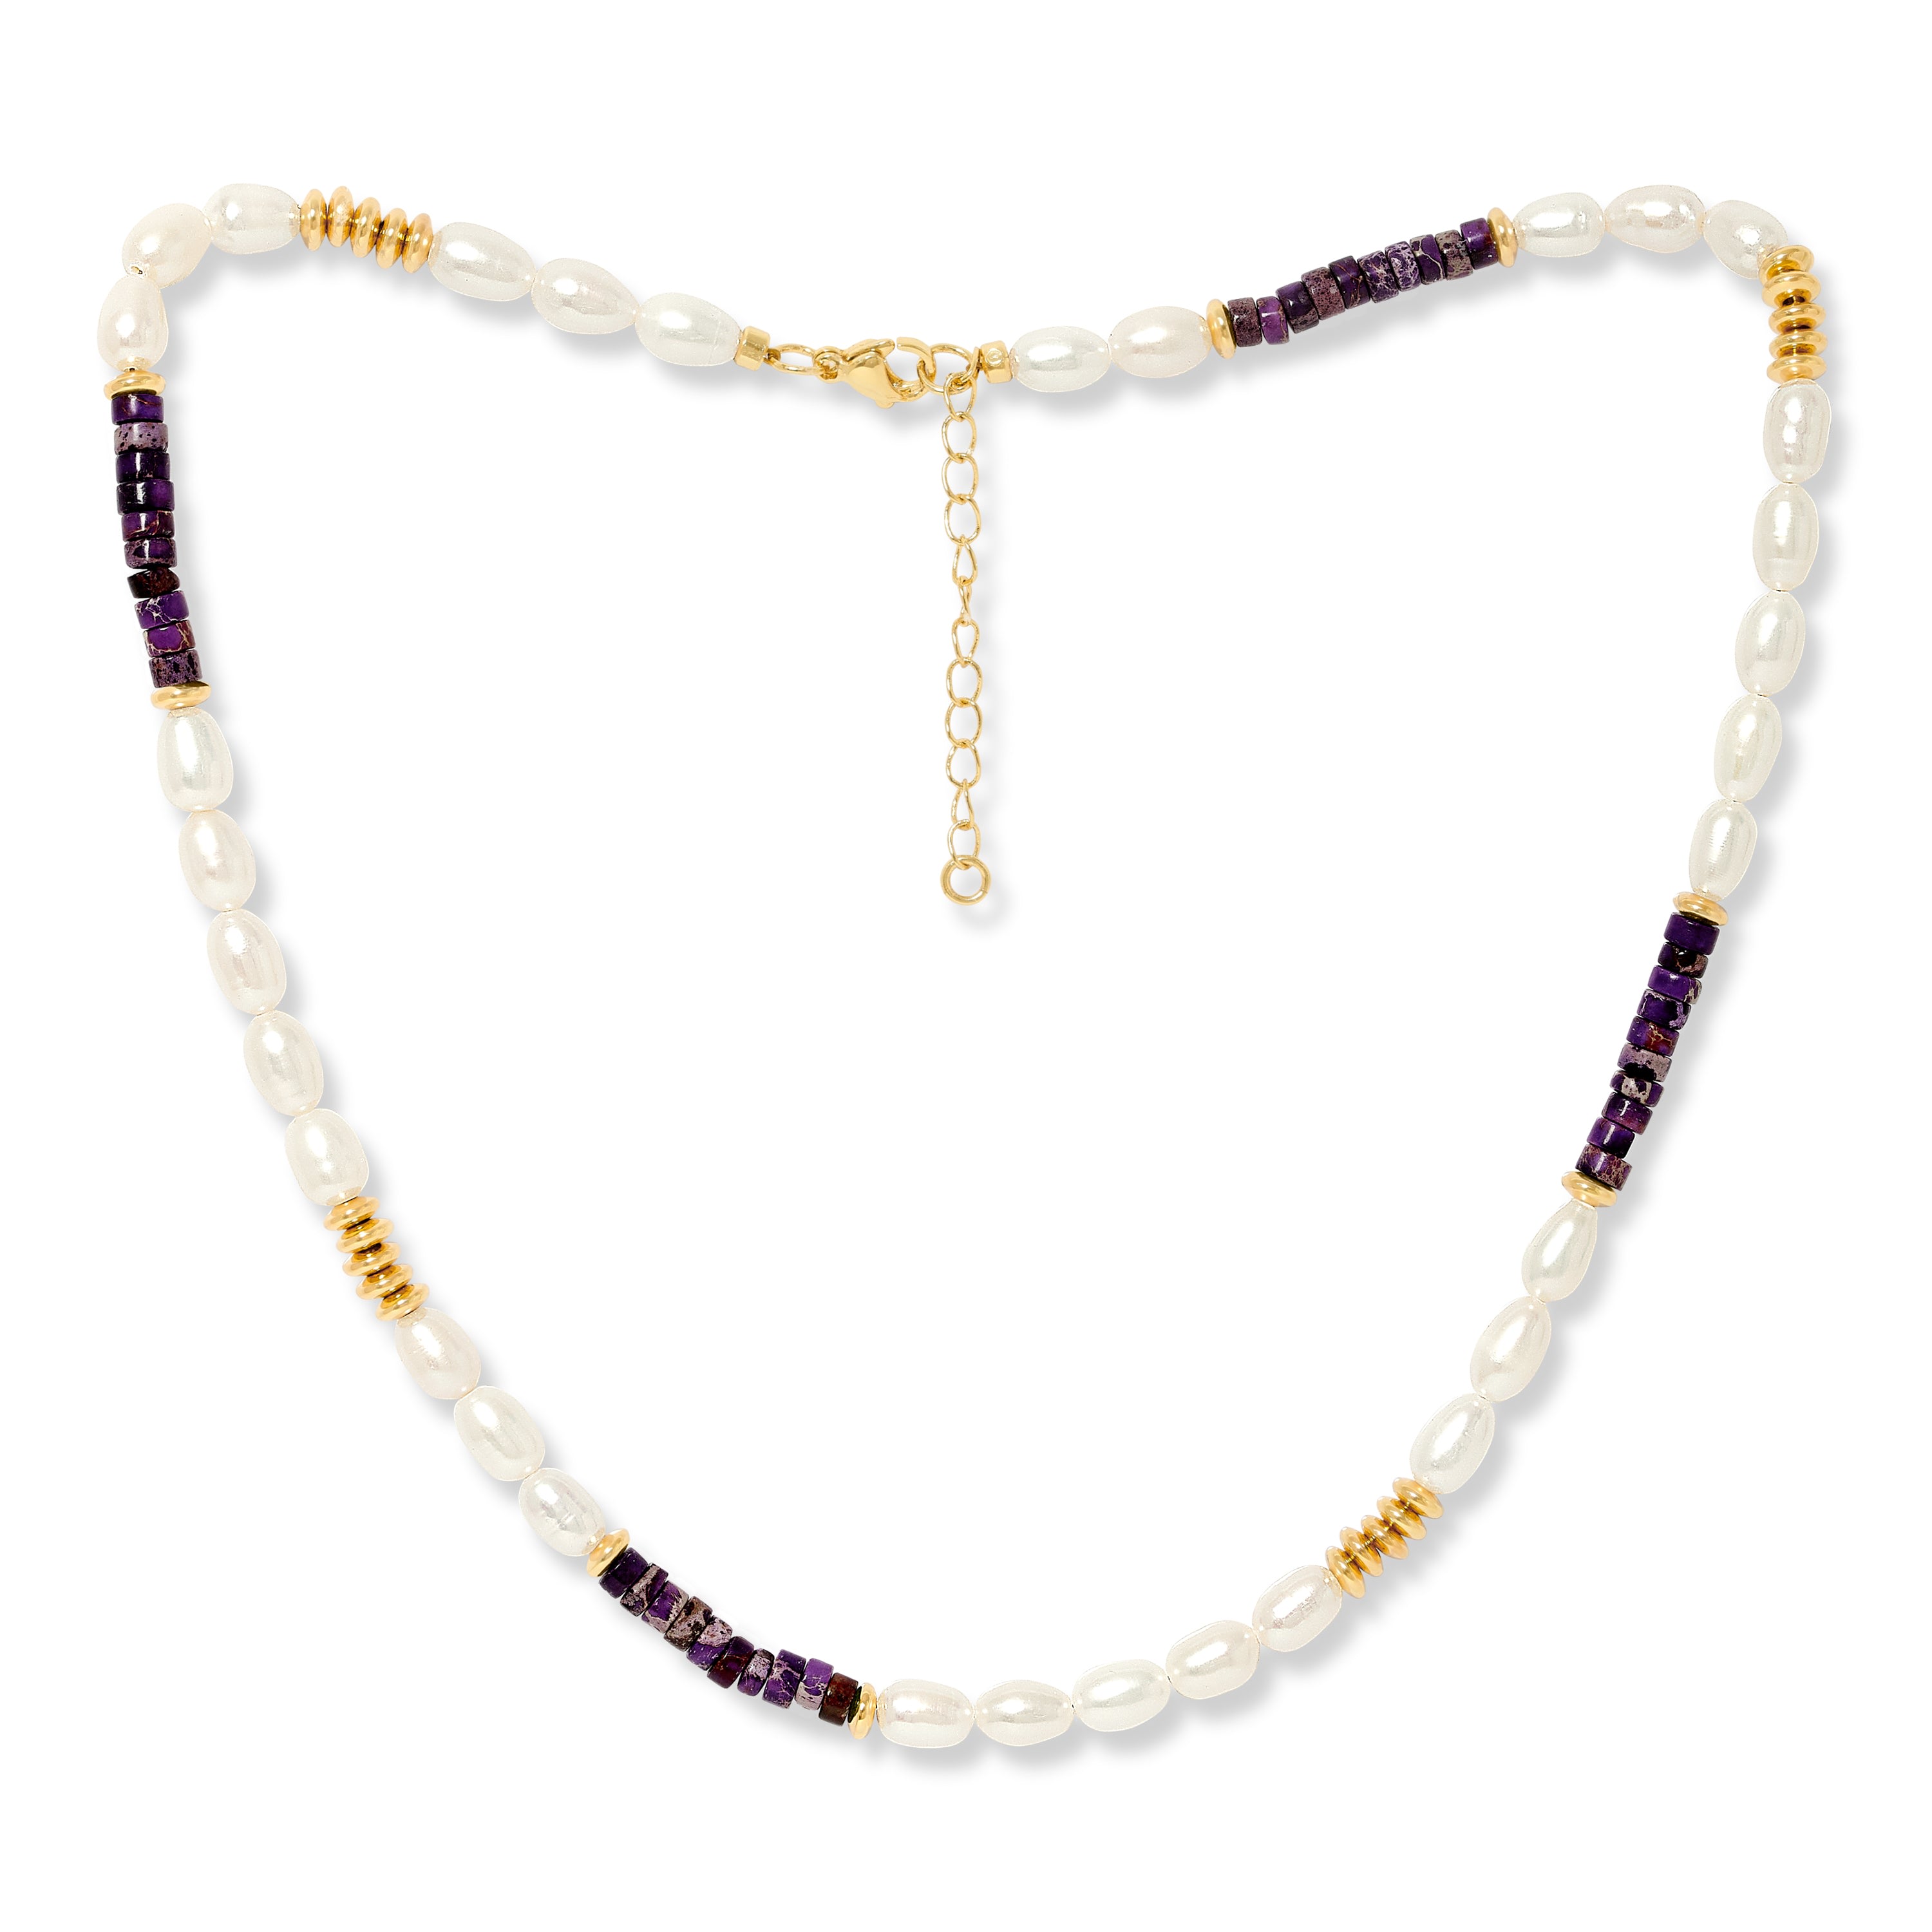 Women’s White / Pink / Purple Nova Oval Cultured Freshwater Pearl Necklace With Purple Jasper & Gold Beads Pearls of the Orient Online